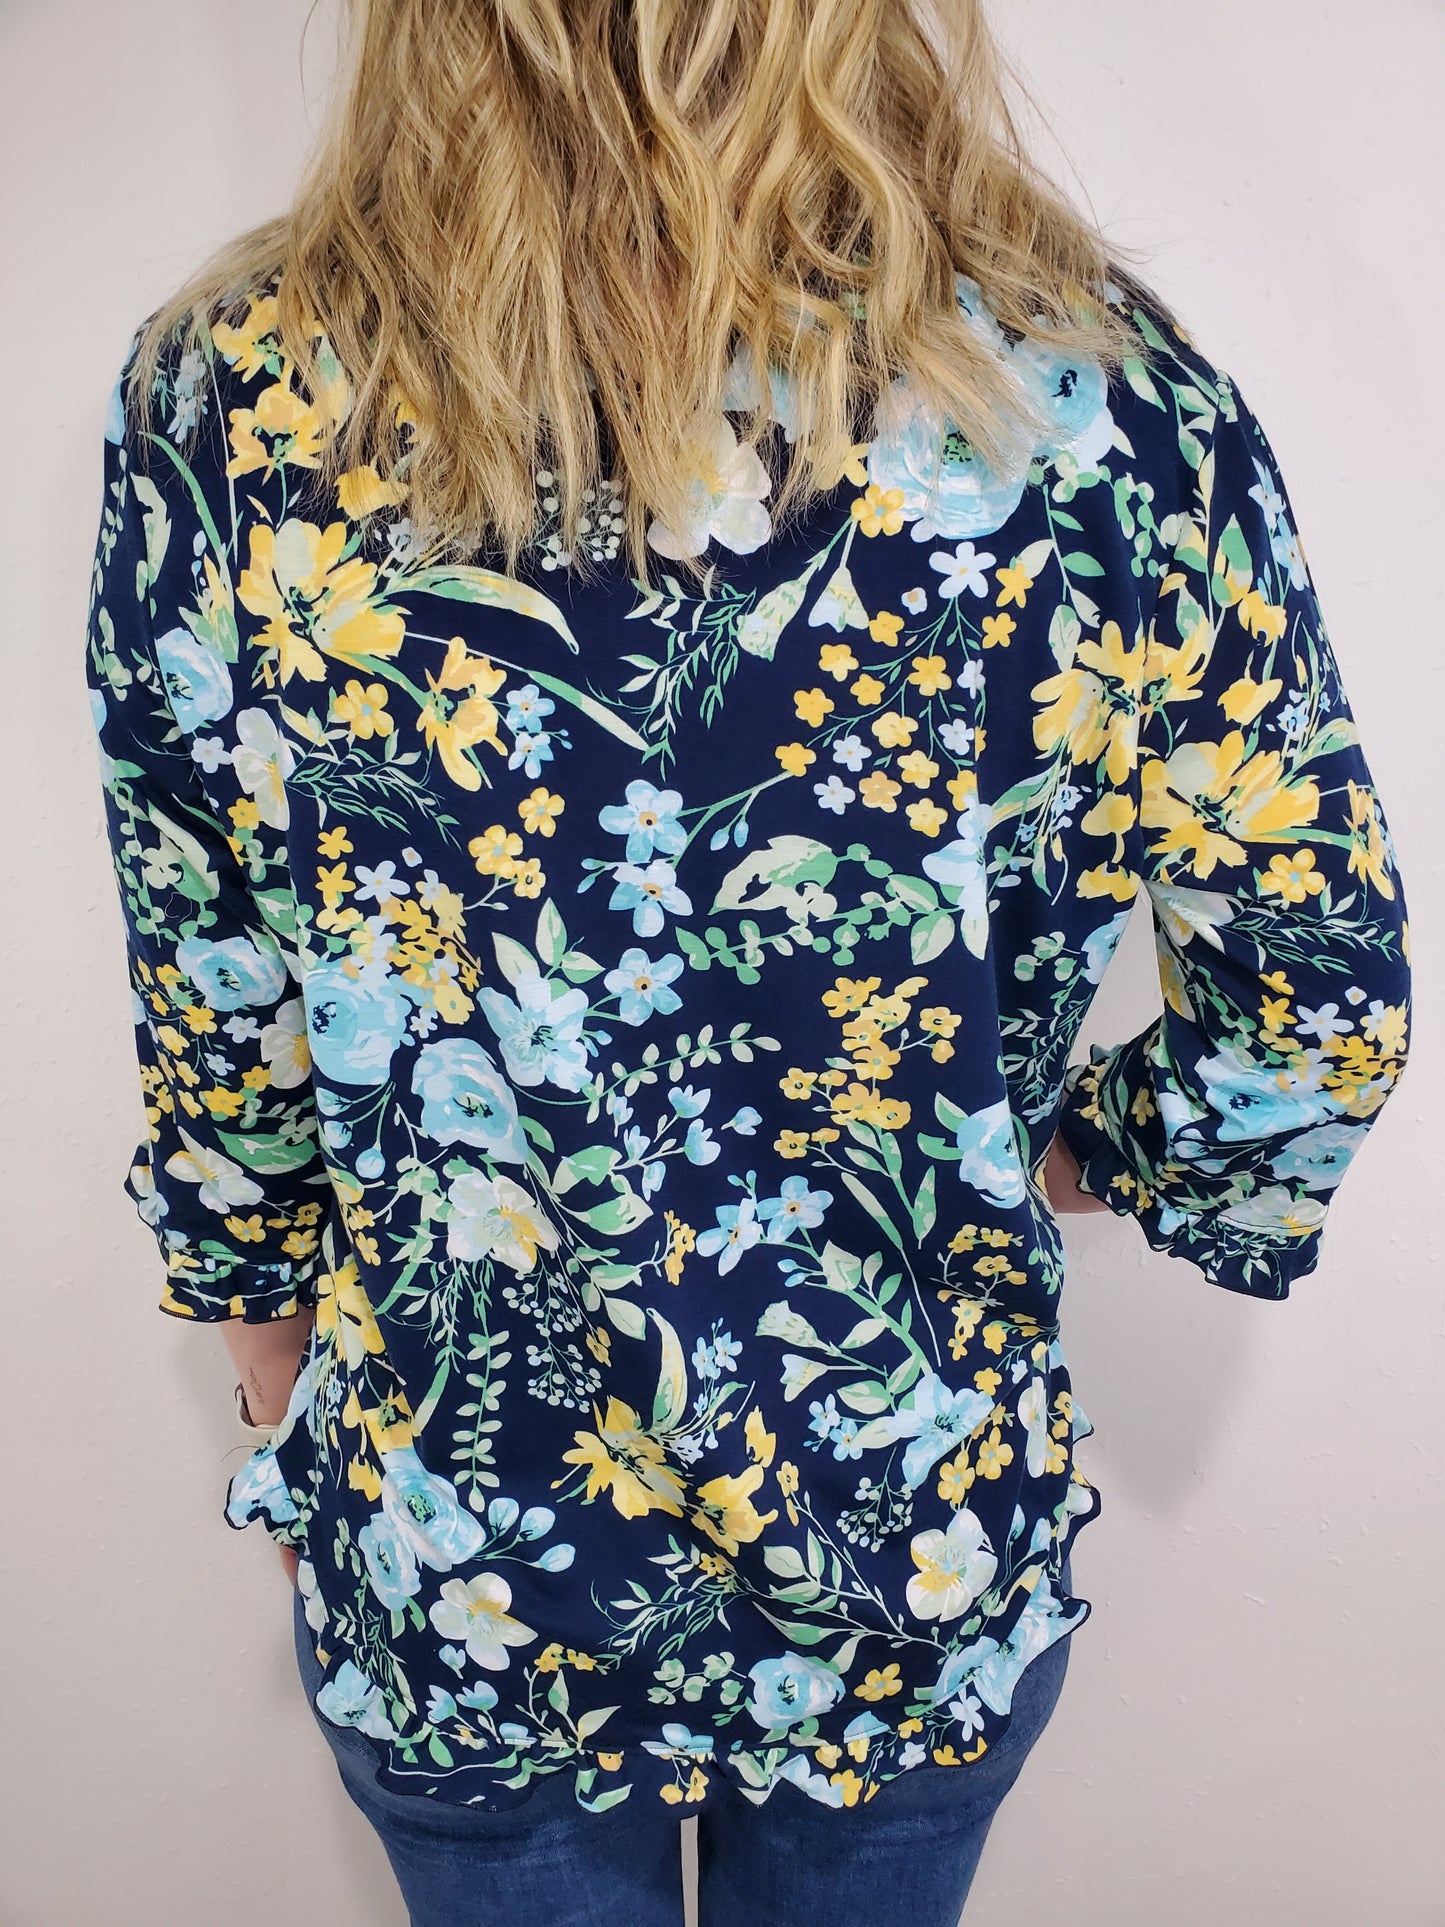 SIMPLY BASIC FLORAL TOP - NAVY MULTI